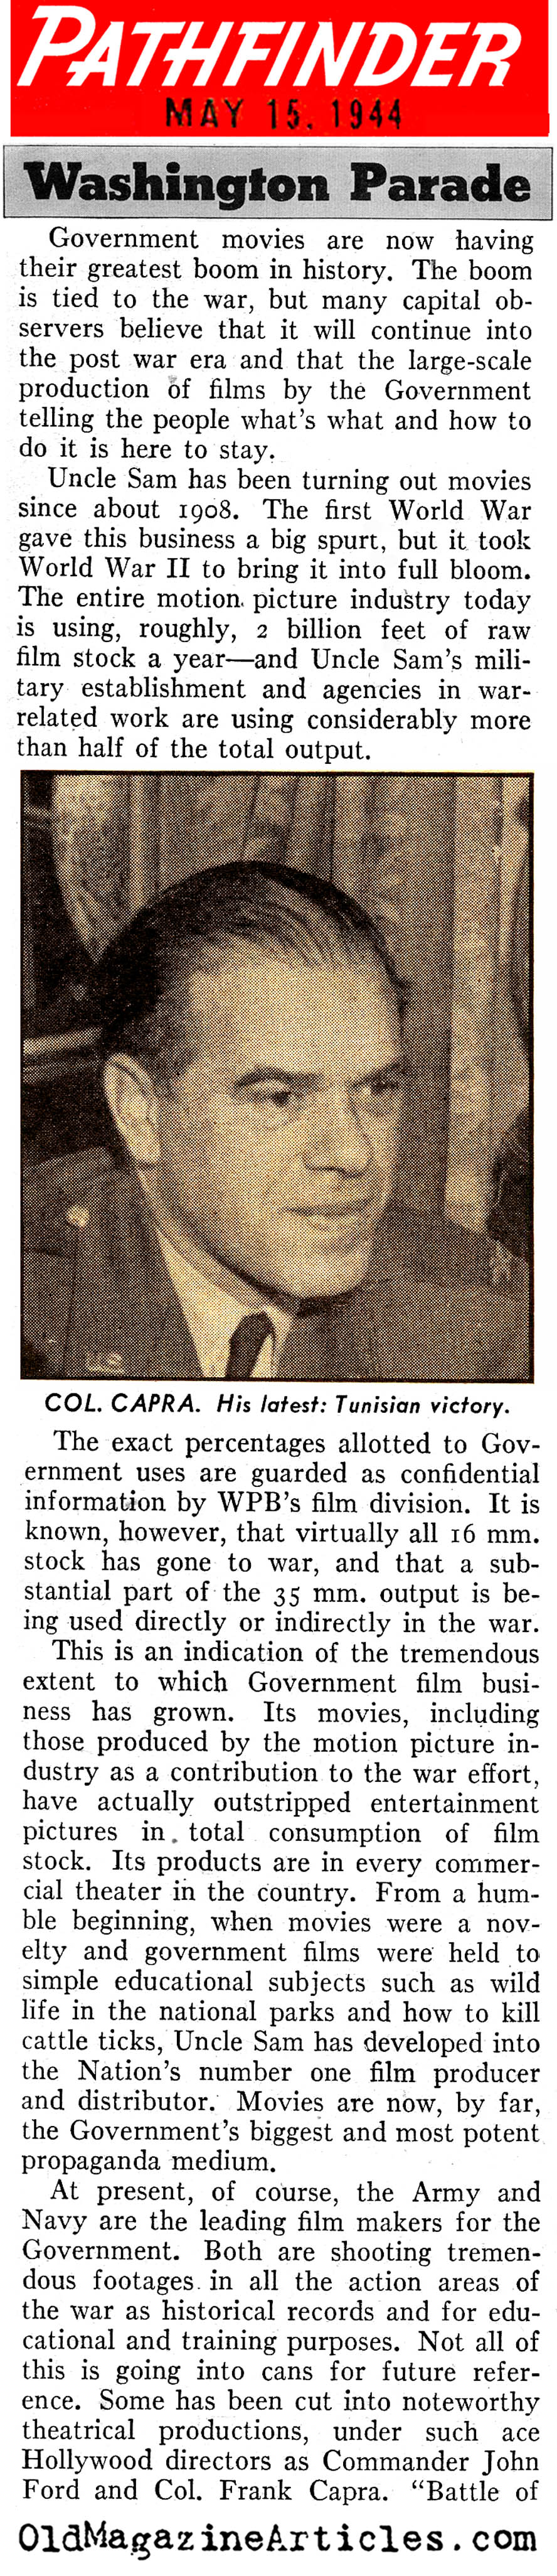 The Government Film Business During WW II (Pathfinder Magazine, 1944)